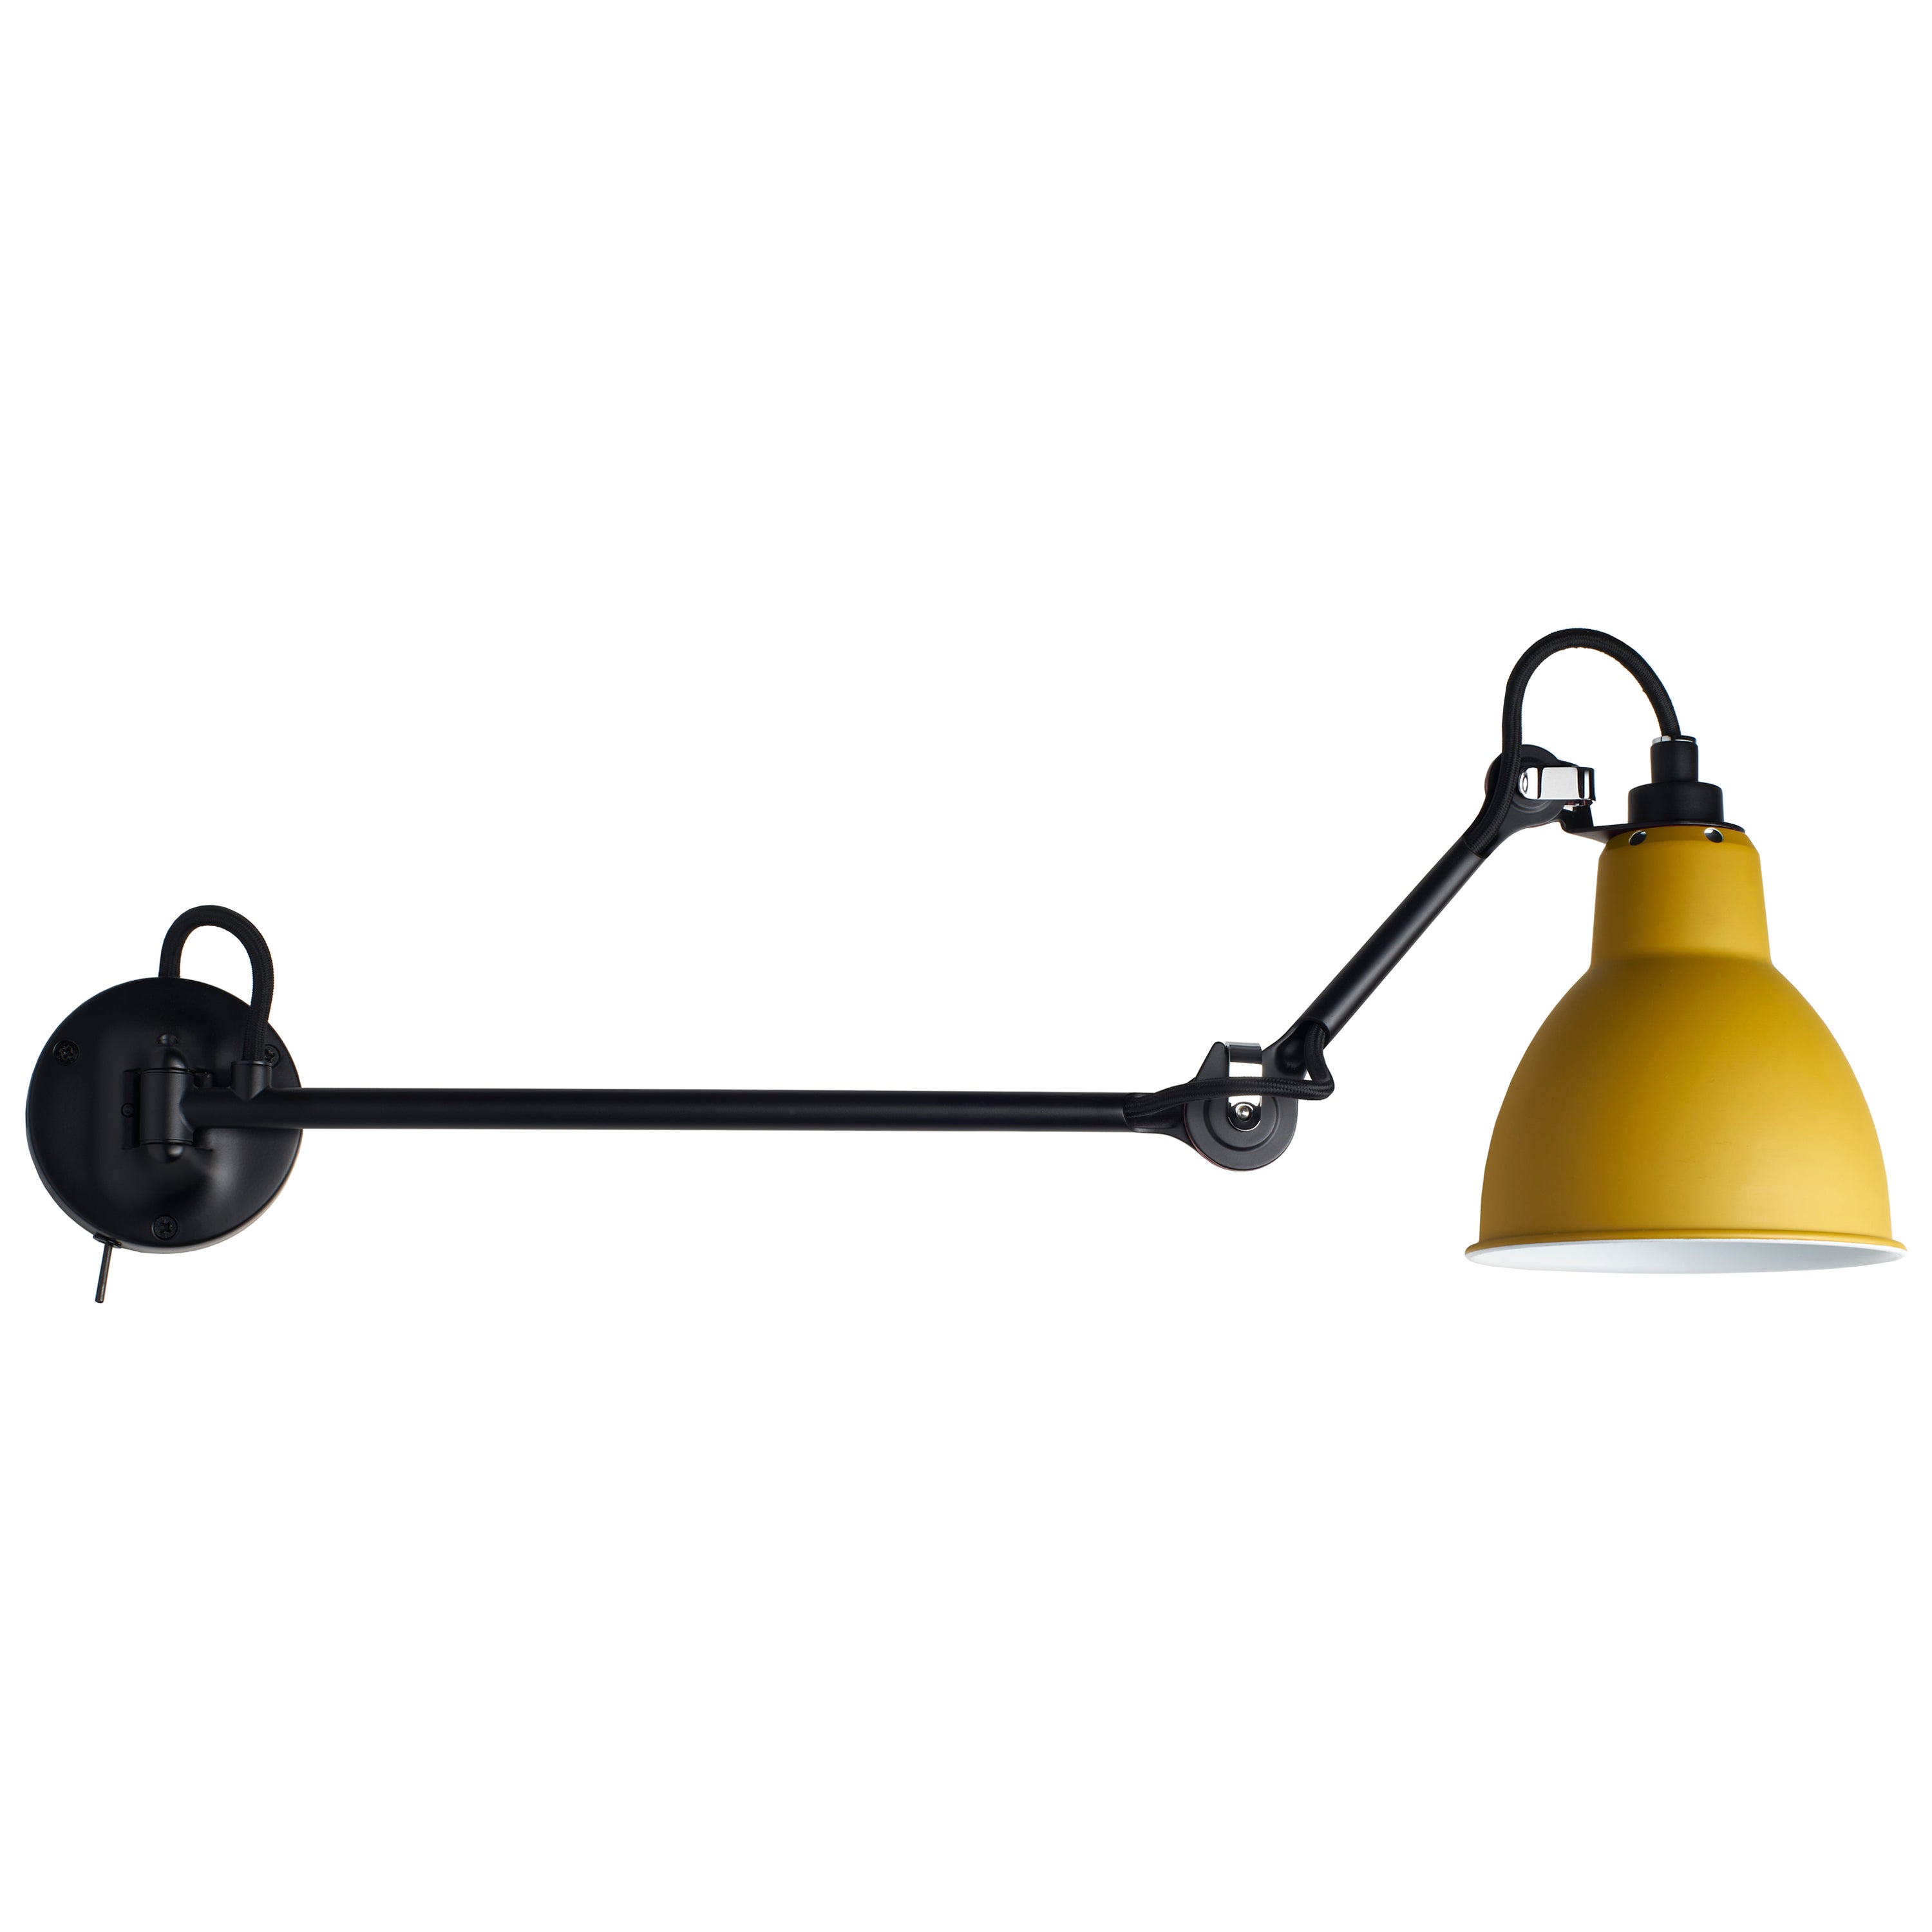 DCW Editions La Lampe Gras N°204 L40 SW Wall Lamp in Black Arm & Yellow Shade For Sale